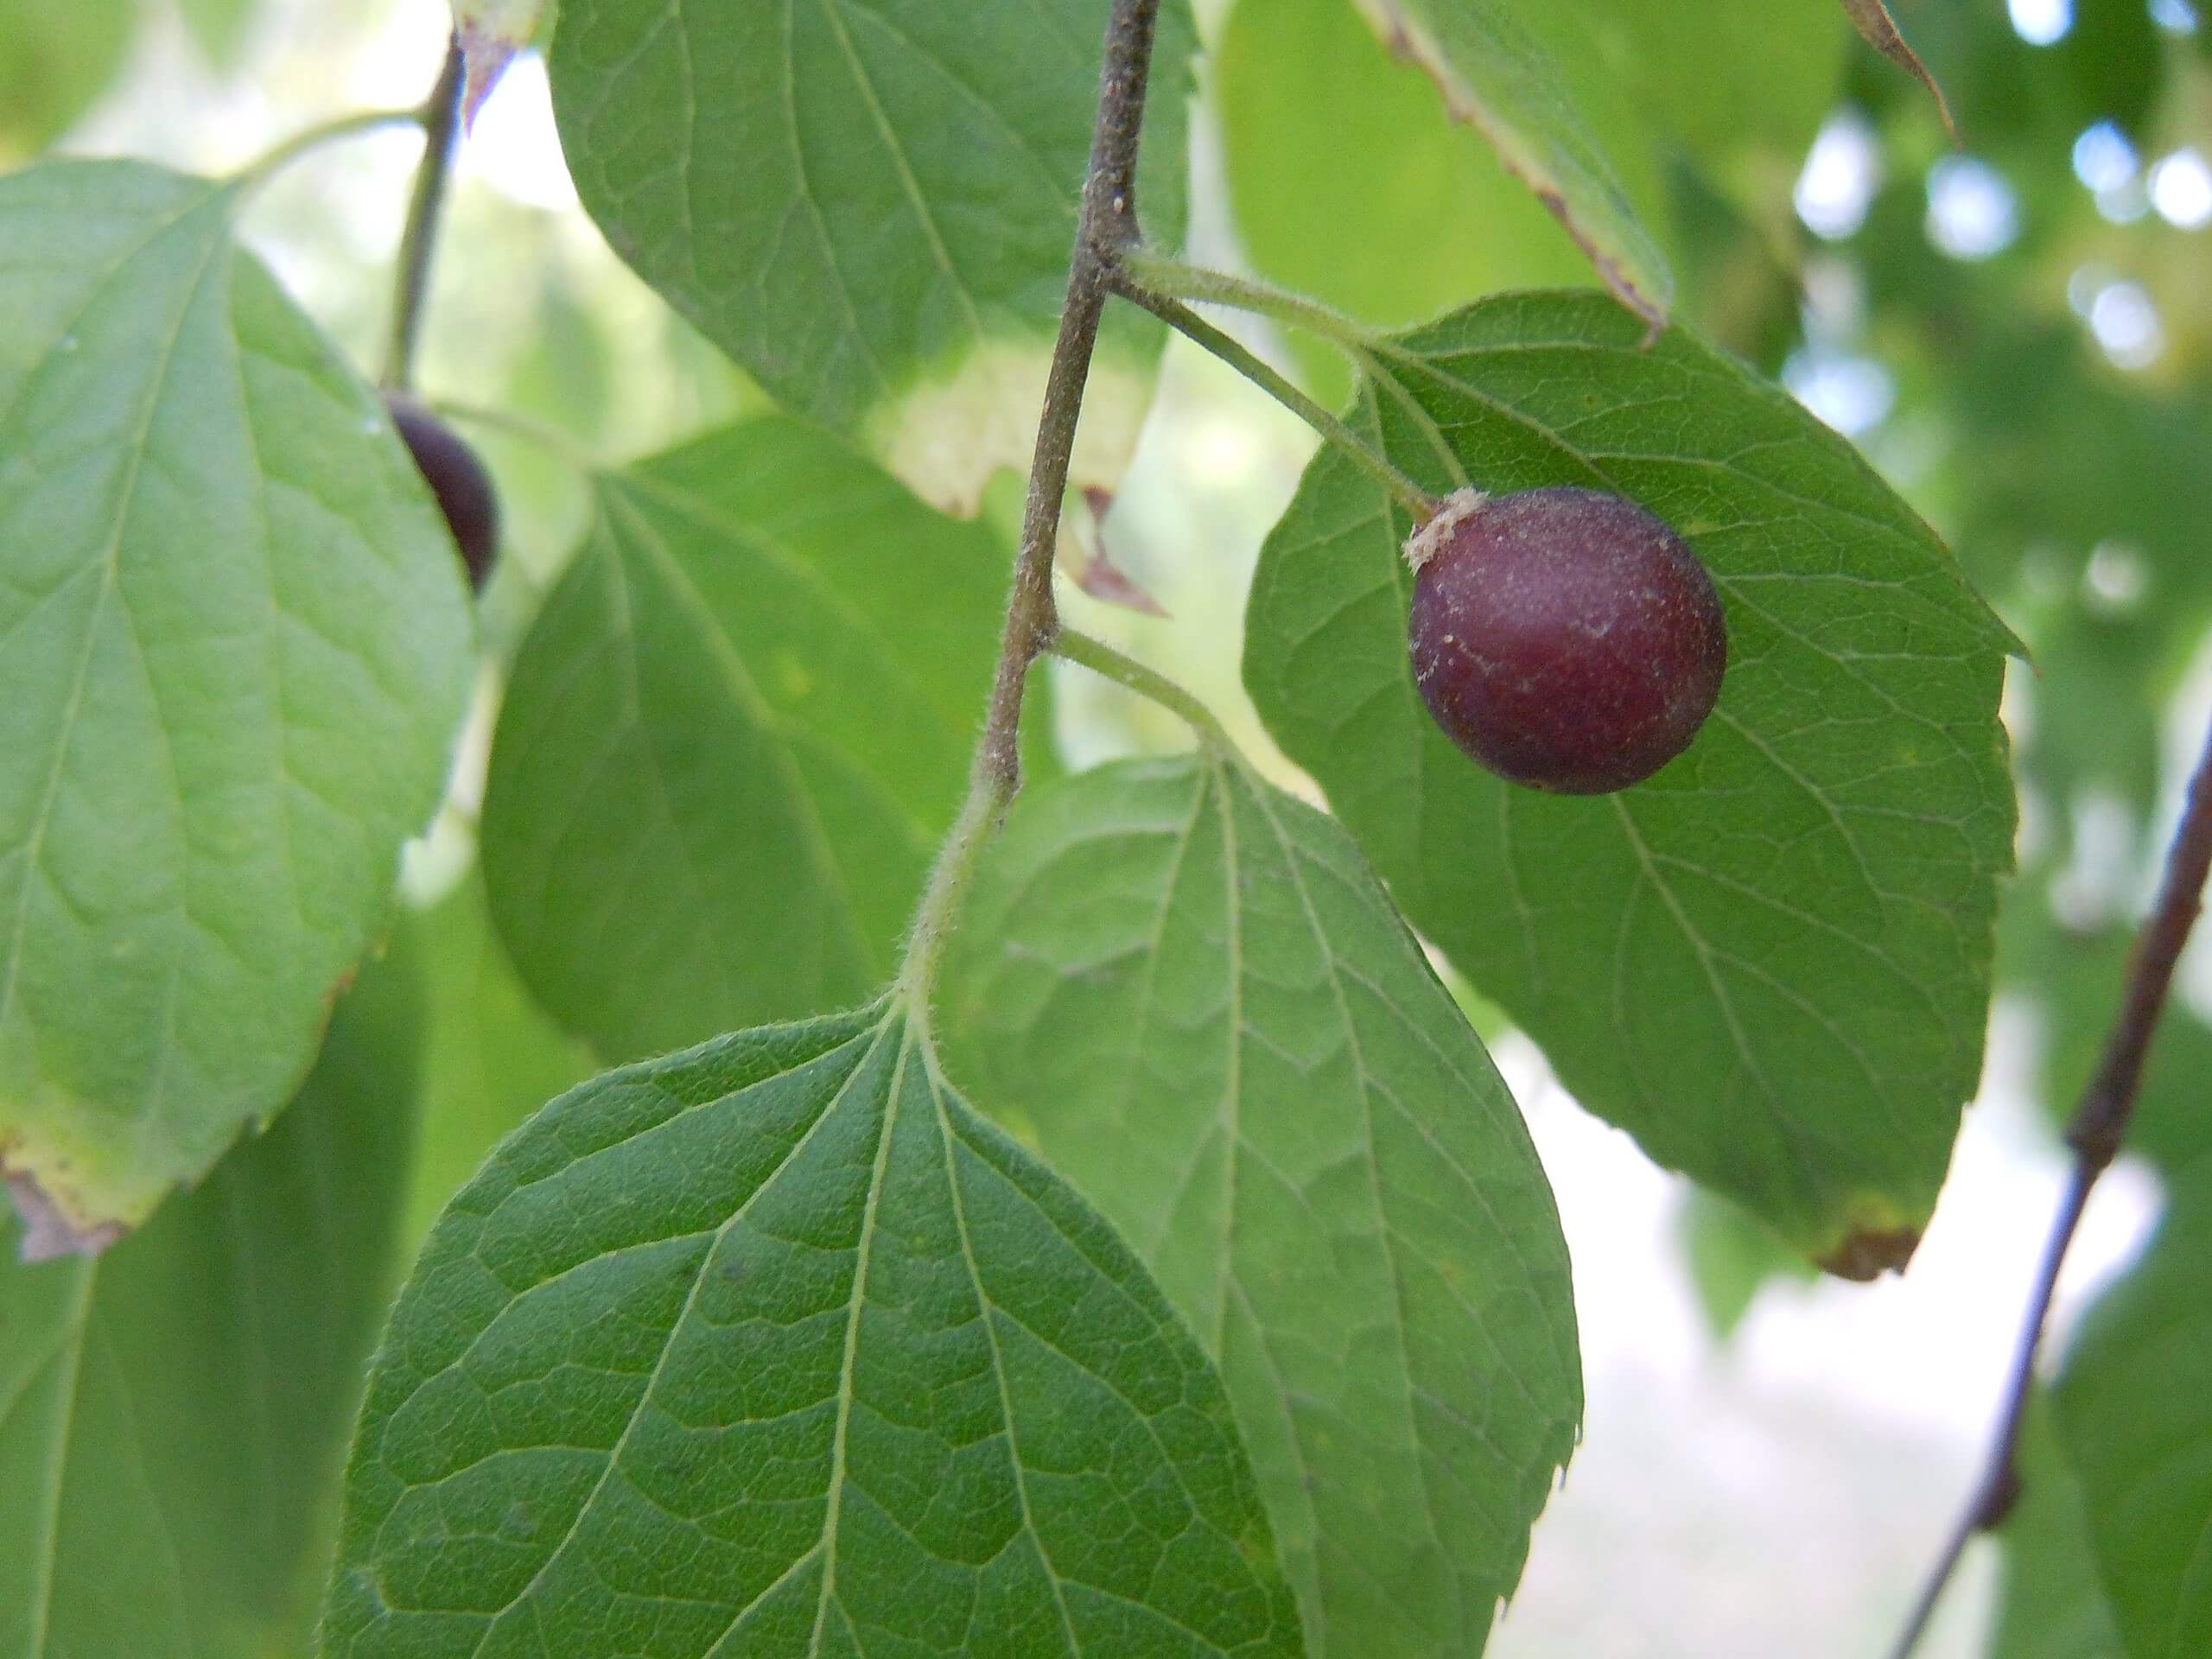 celtis occidentalis hackberry edible berries fruit tree small berry wikimedia commons yuriy flavorful very but northern american plants common sa